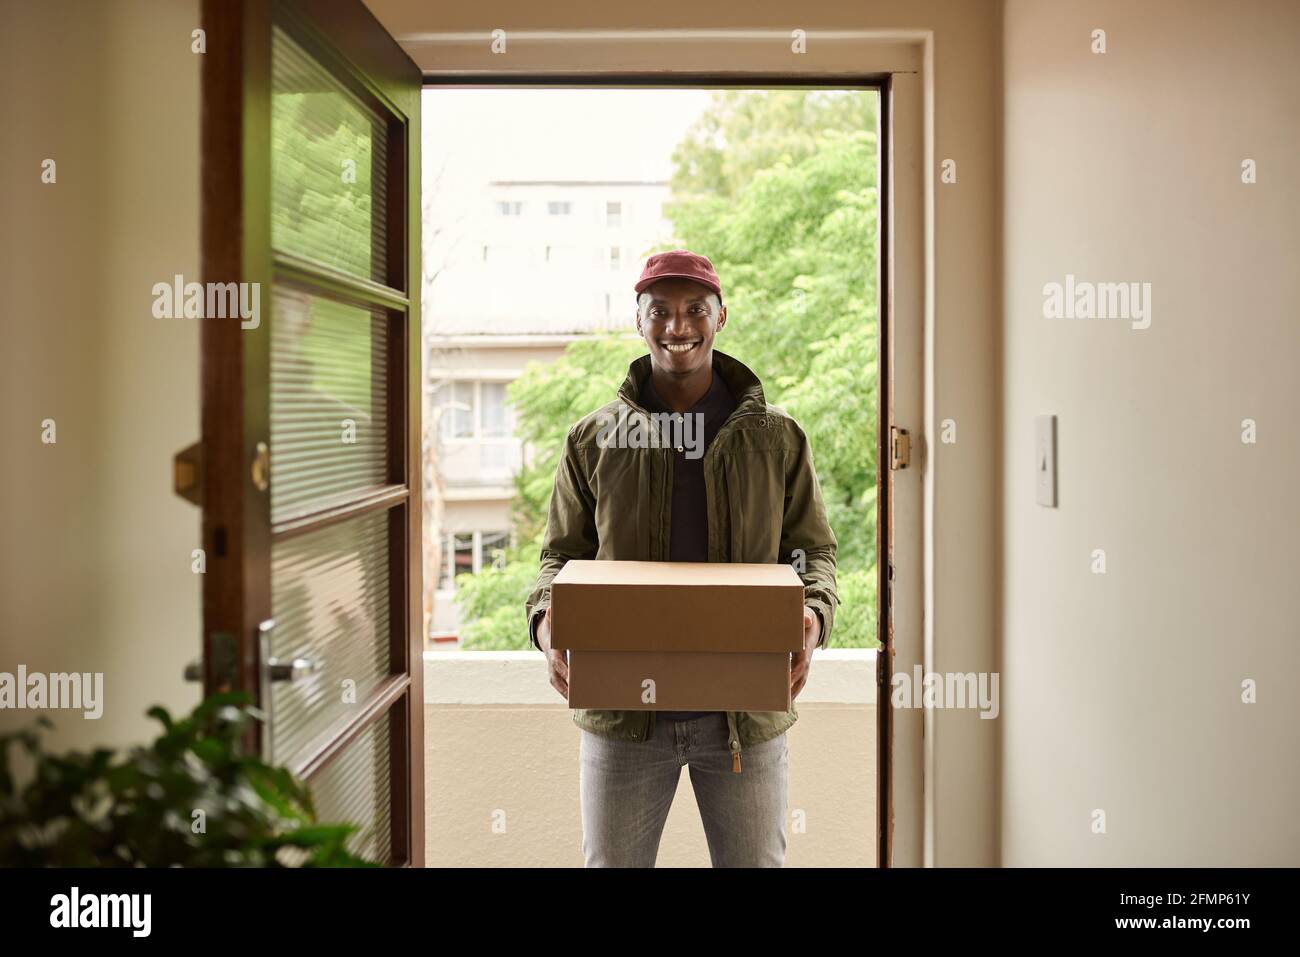 Smiling African delivery man standing at a front door carrying packages Stock Photo